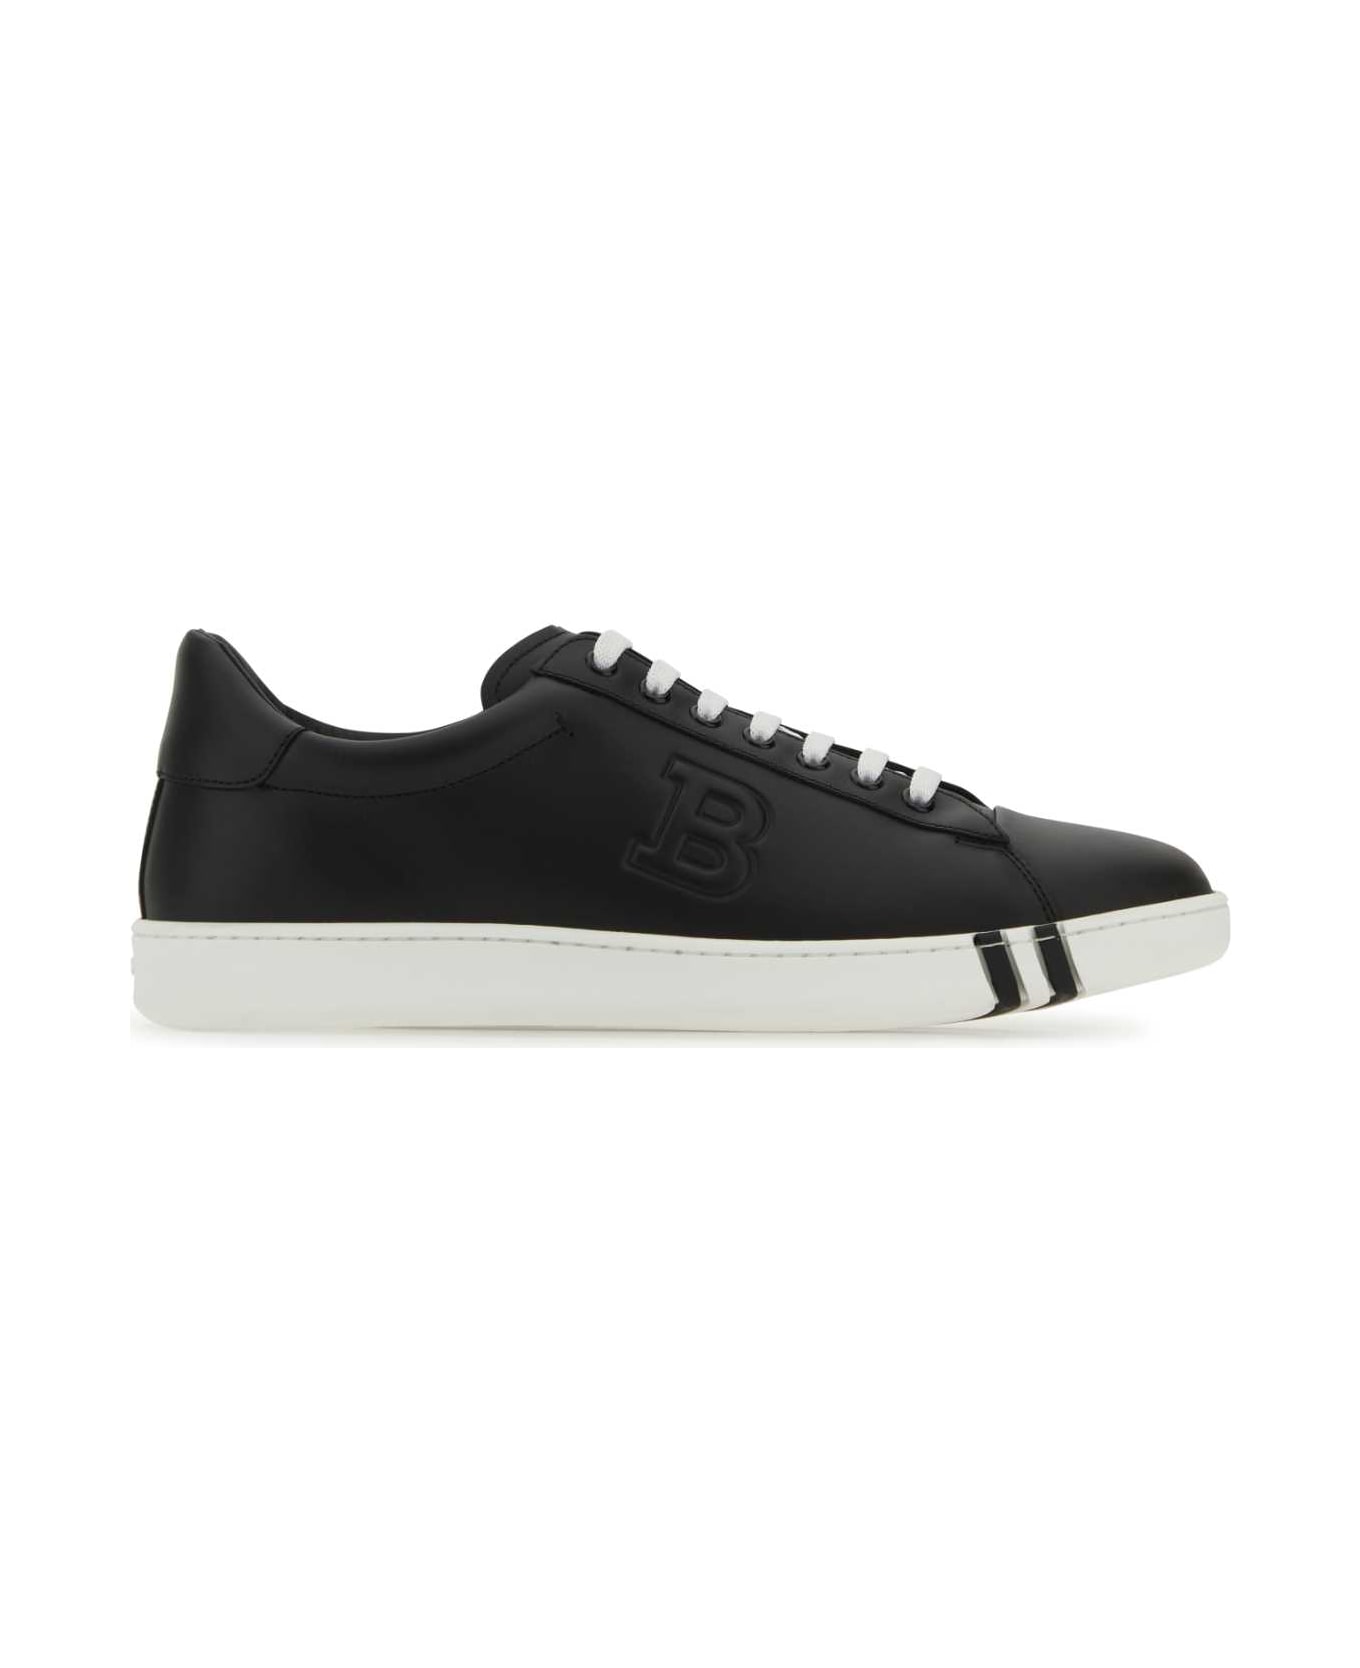 Bally Black Leather Asher Sneakers - F600